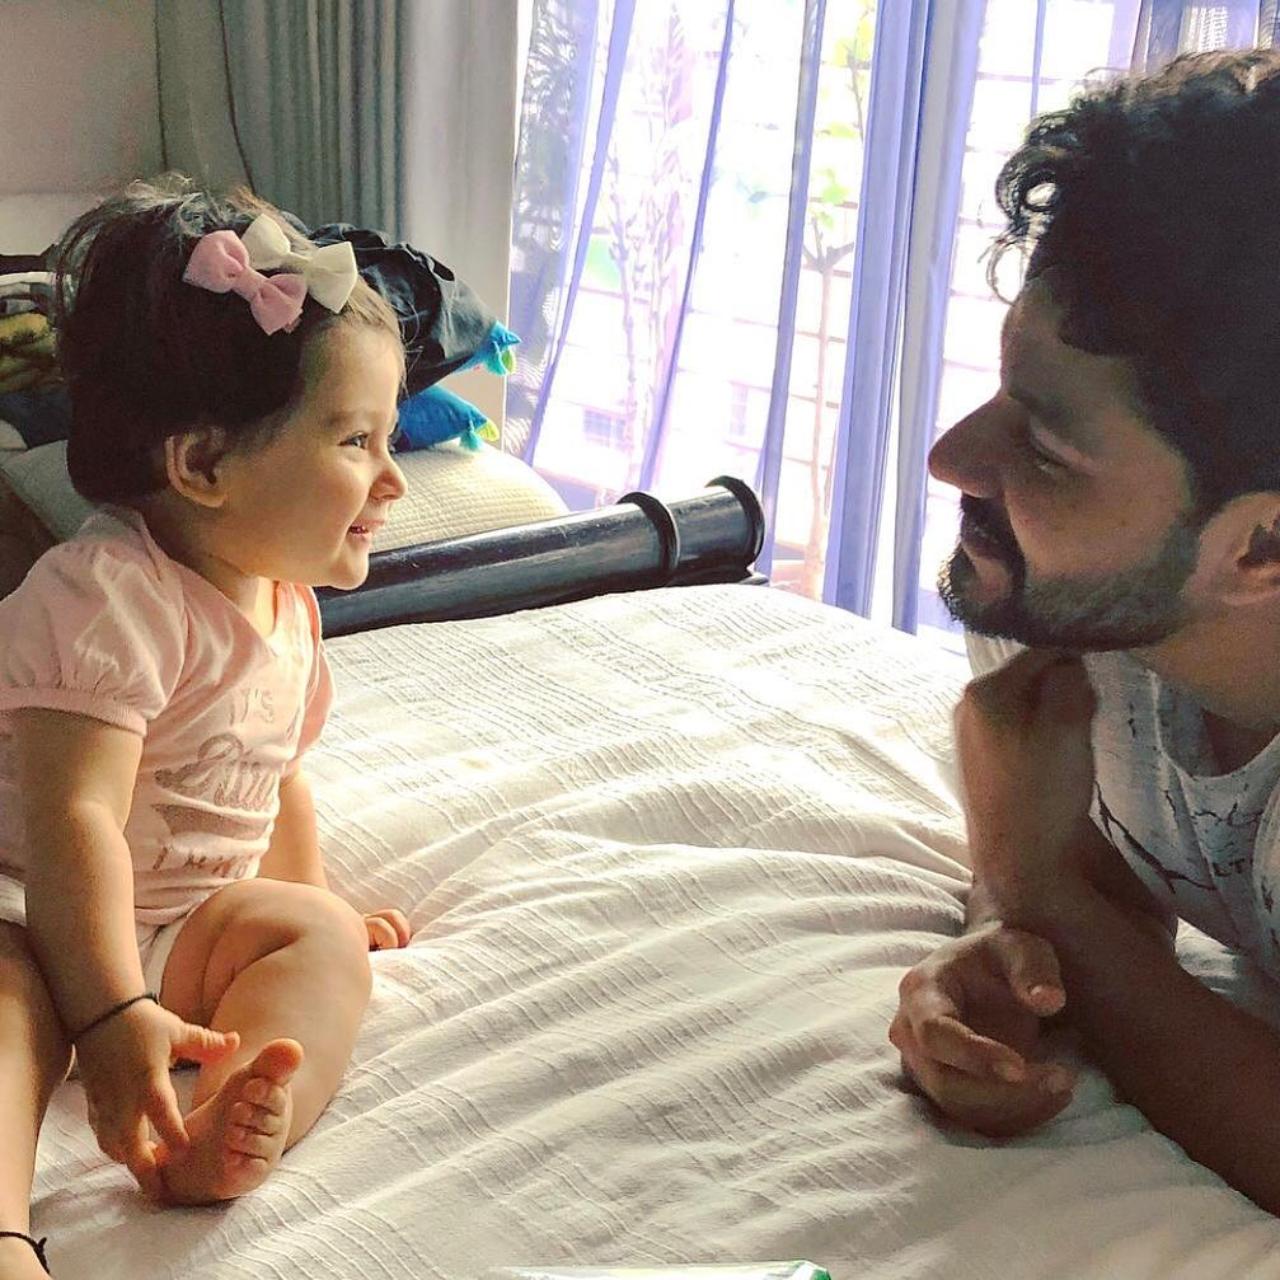 Kunal and Soha welcomed Inaaya in September of 2017. When not shooting, Kunal Kemmu prefers to spend time with his little one